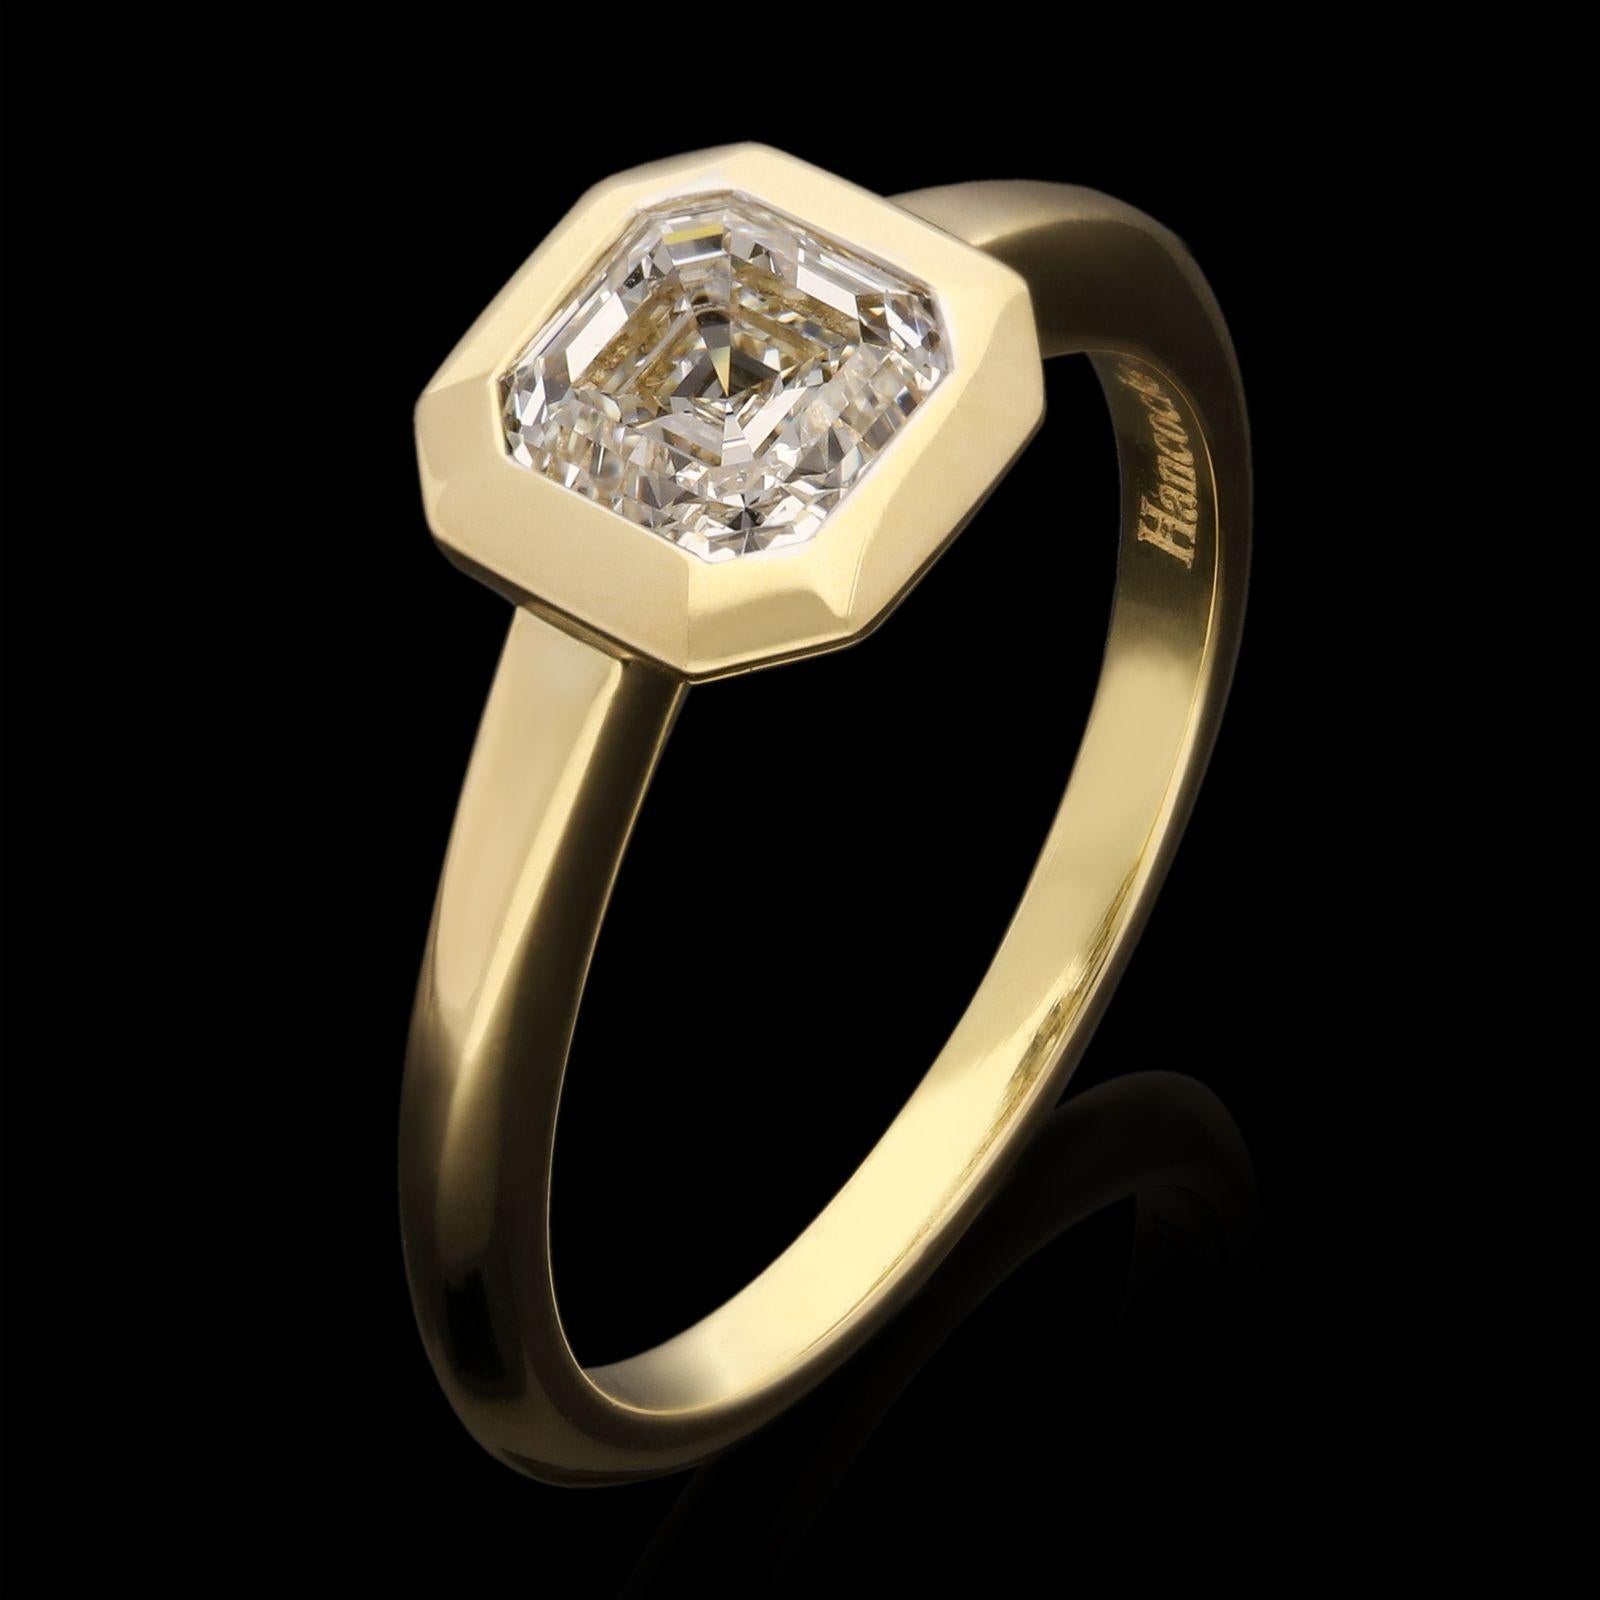 A beautiful old-cut diamond and yellow gold ring by Hancocks, centred with a beautiful vintage Asscher cut diamond weighing 1.01ct and of G colour and SI1 clarity bezel set within a finely hand crafted 18ct yellow gold mount with geometric barred